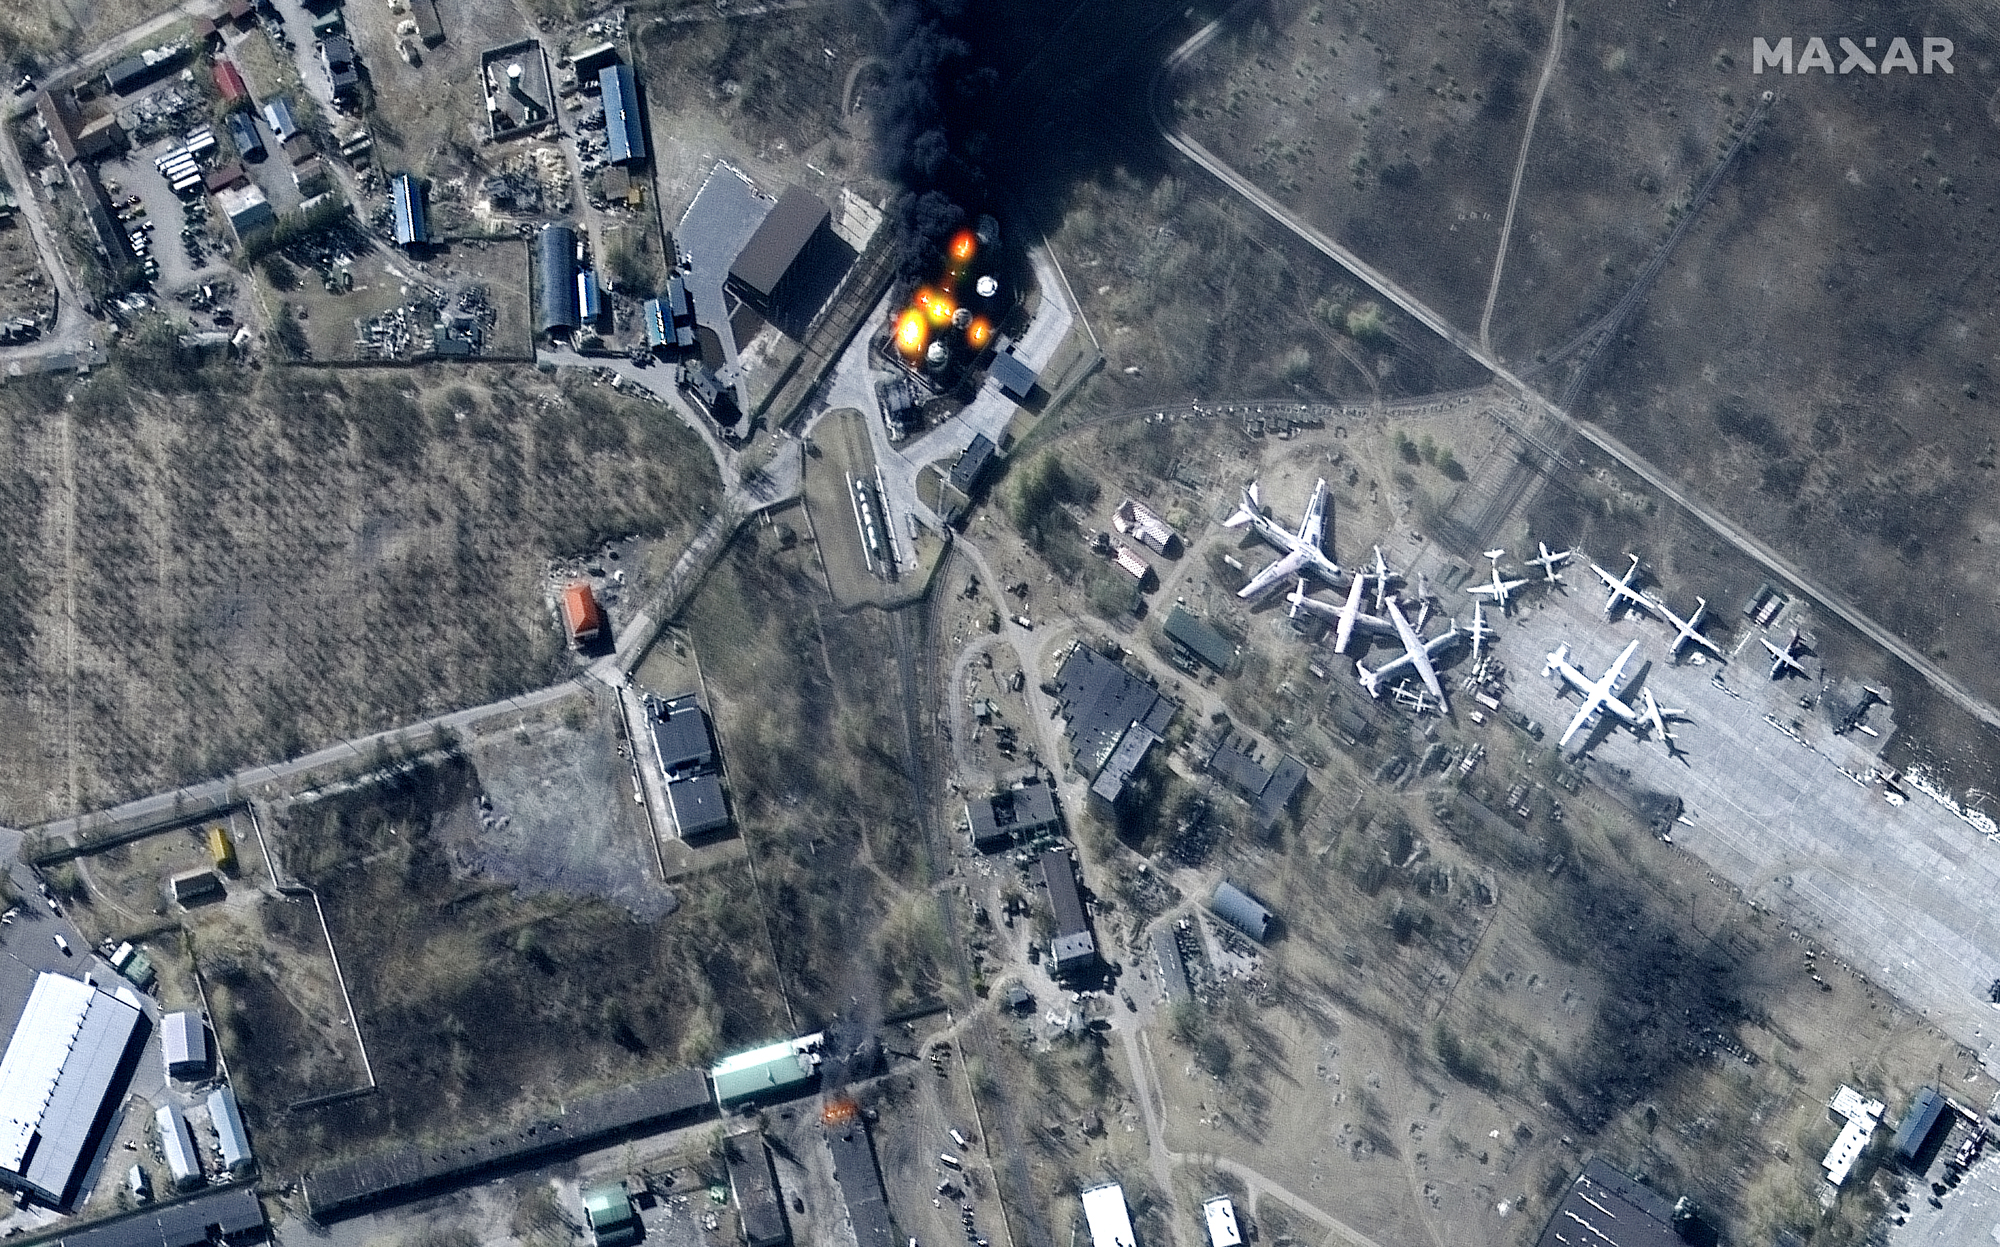 Multispectral satellite image showing damage to buildings and fuel storage tanks on fire at Antonov Airport in Ukraine on March 11, 2022 as seen by the WorldView-2 satellite for Maxar Technologies.